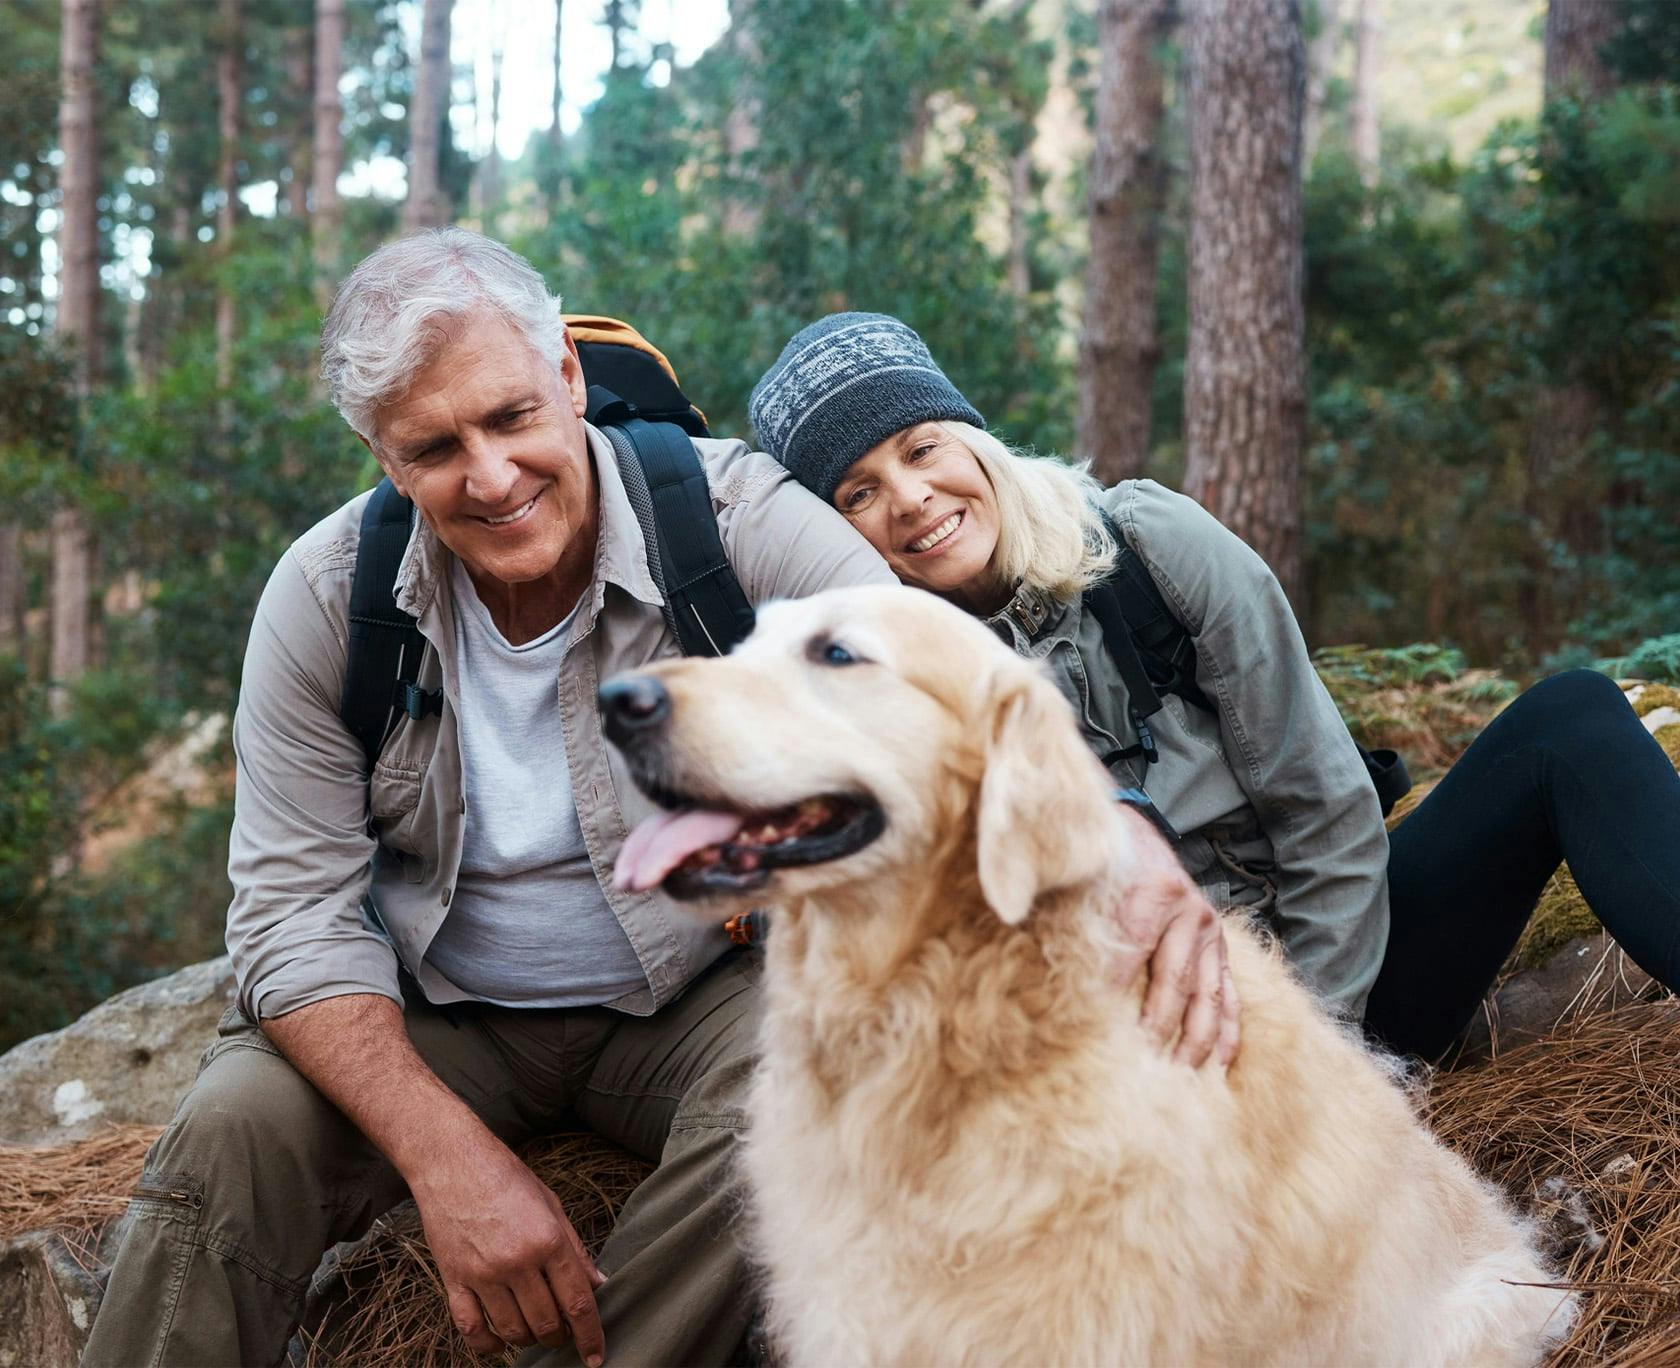 Man and woman on a hike with their dog